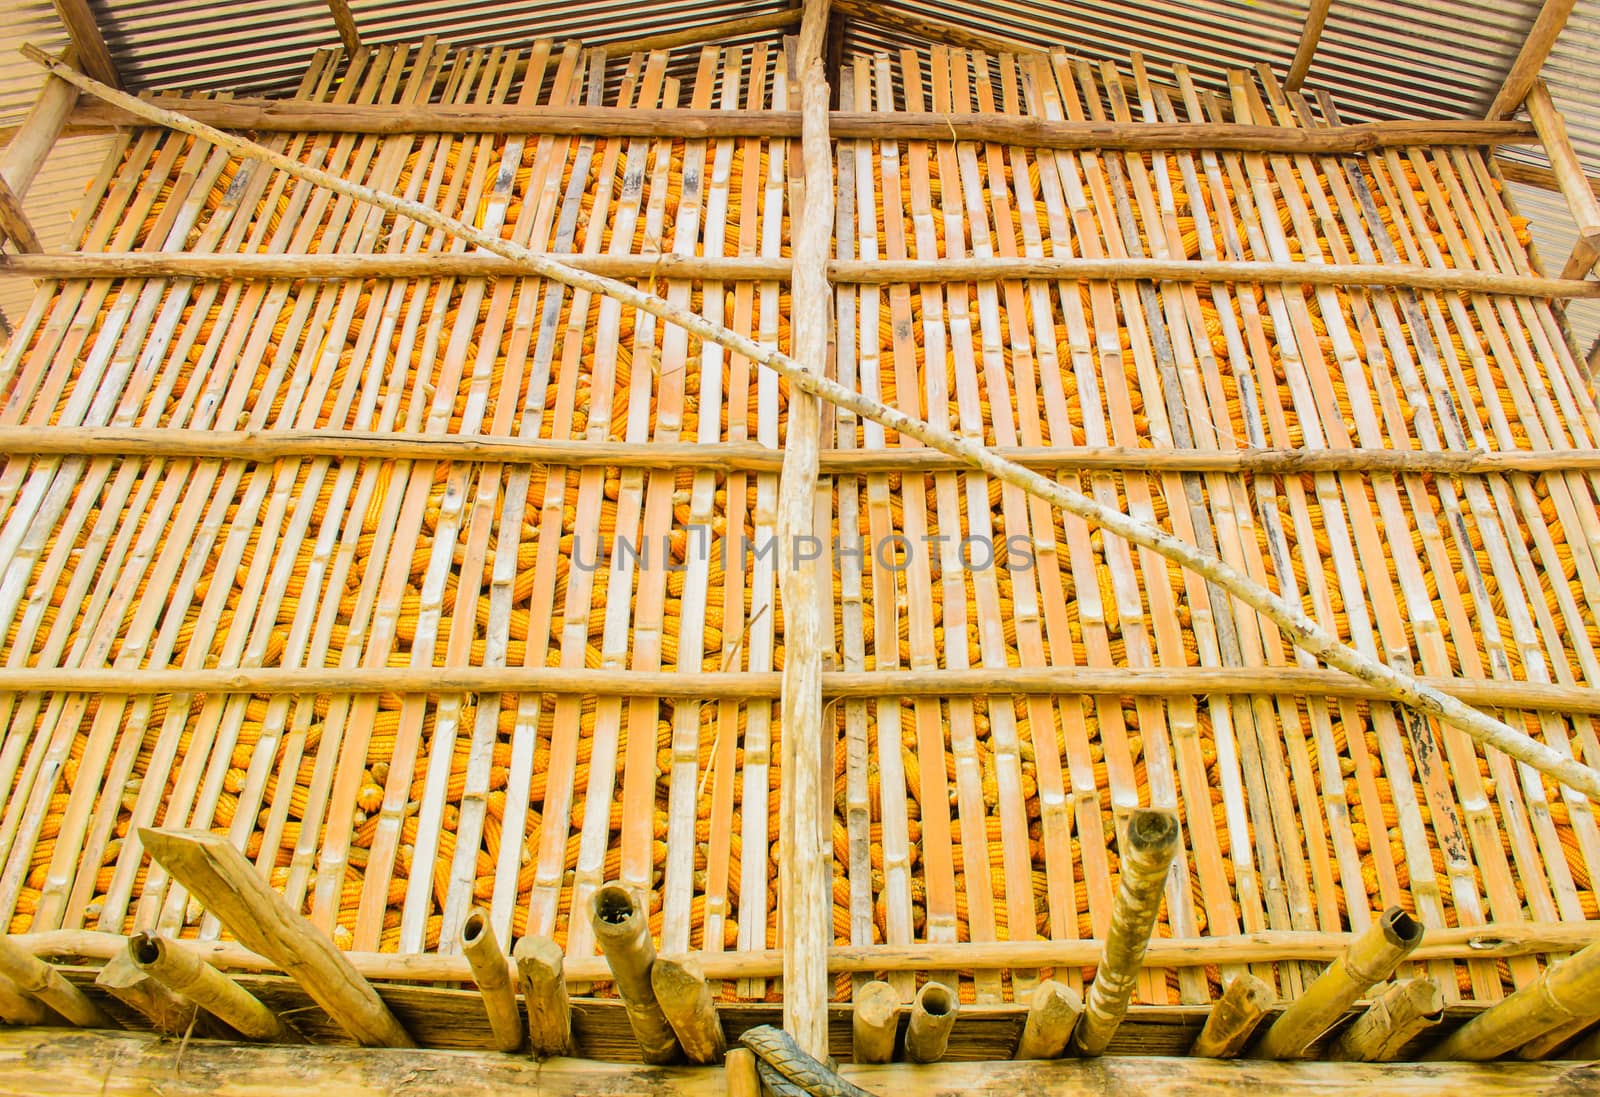 The Barn of Corn made from wood and bamboo.